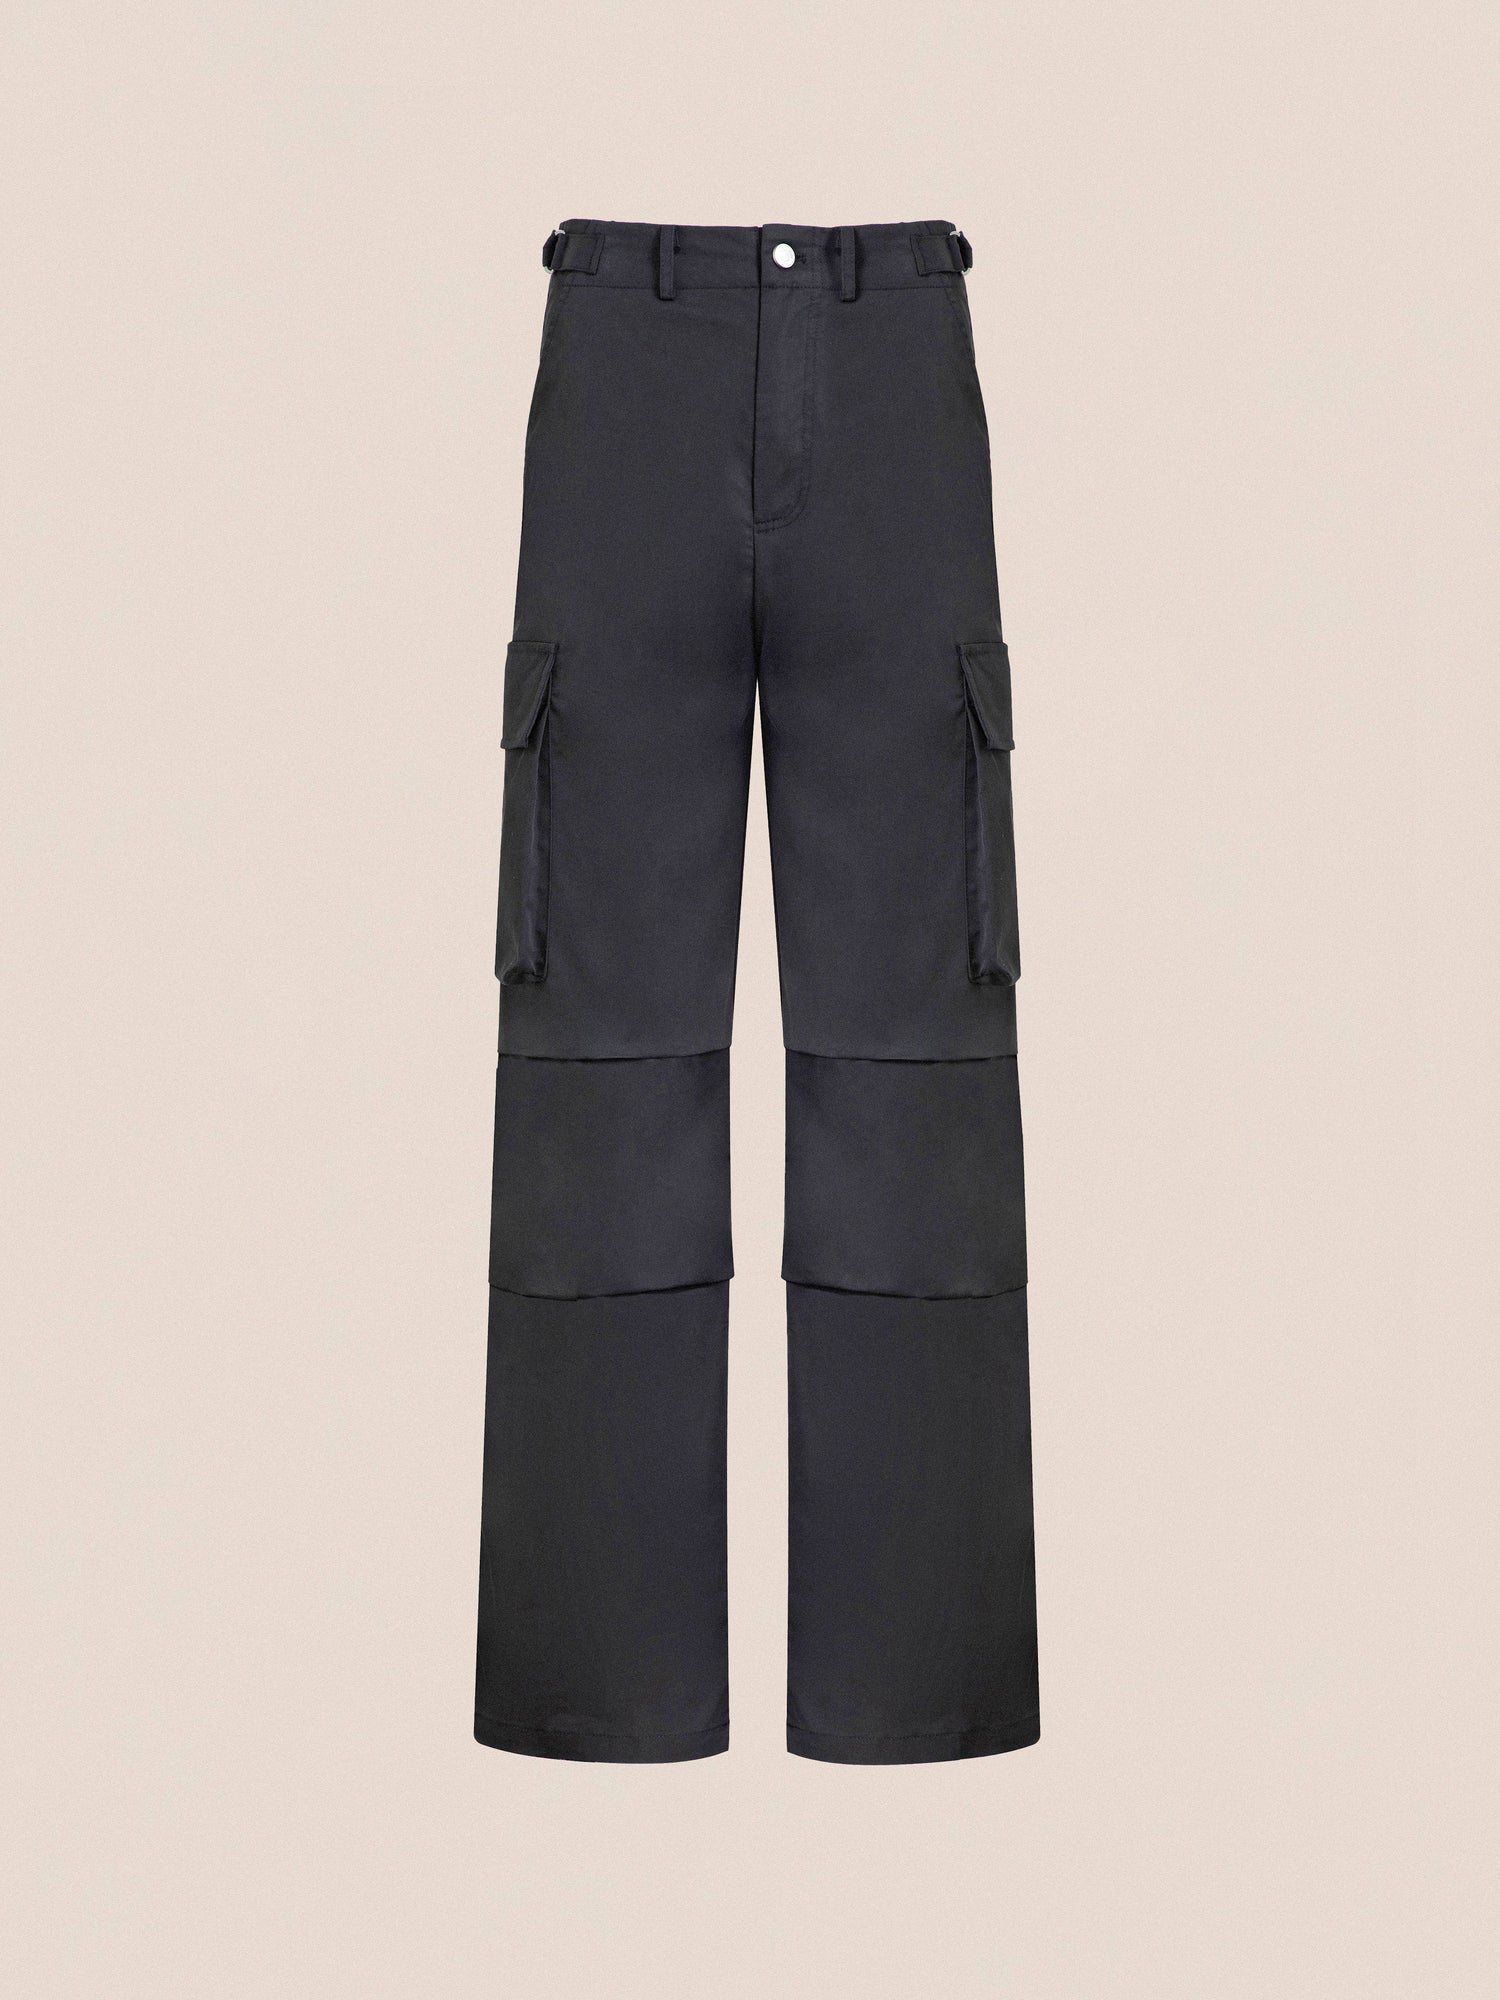 Black Found Elbas Cargo Pants with multiple pockets and a front button, displayed against a neutral beige background.